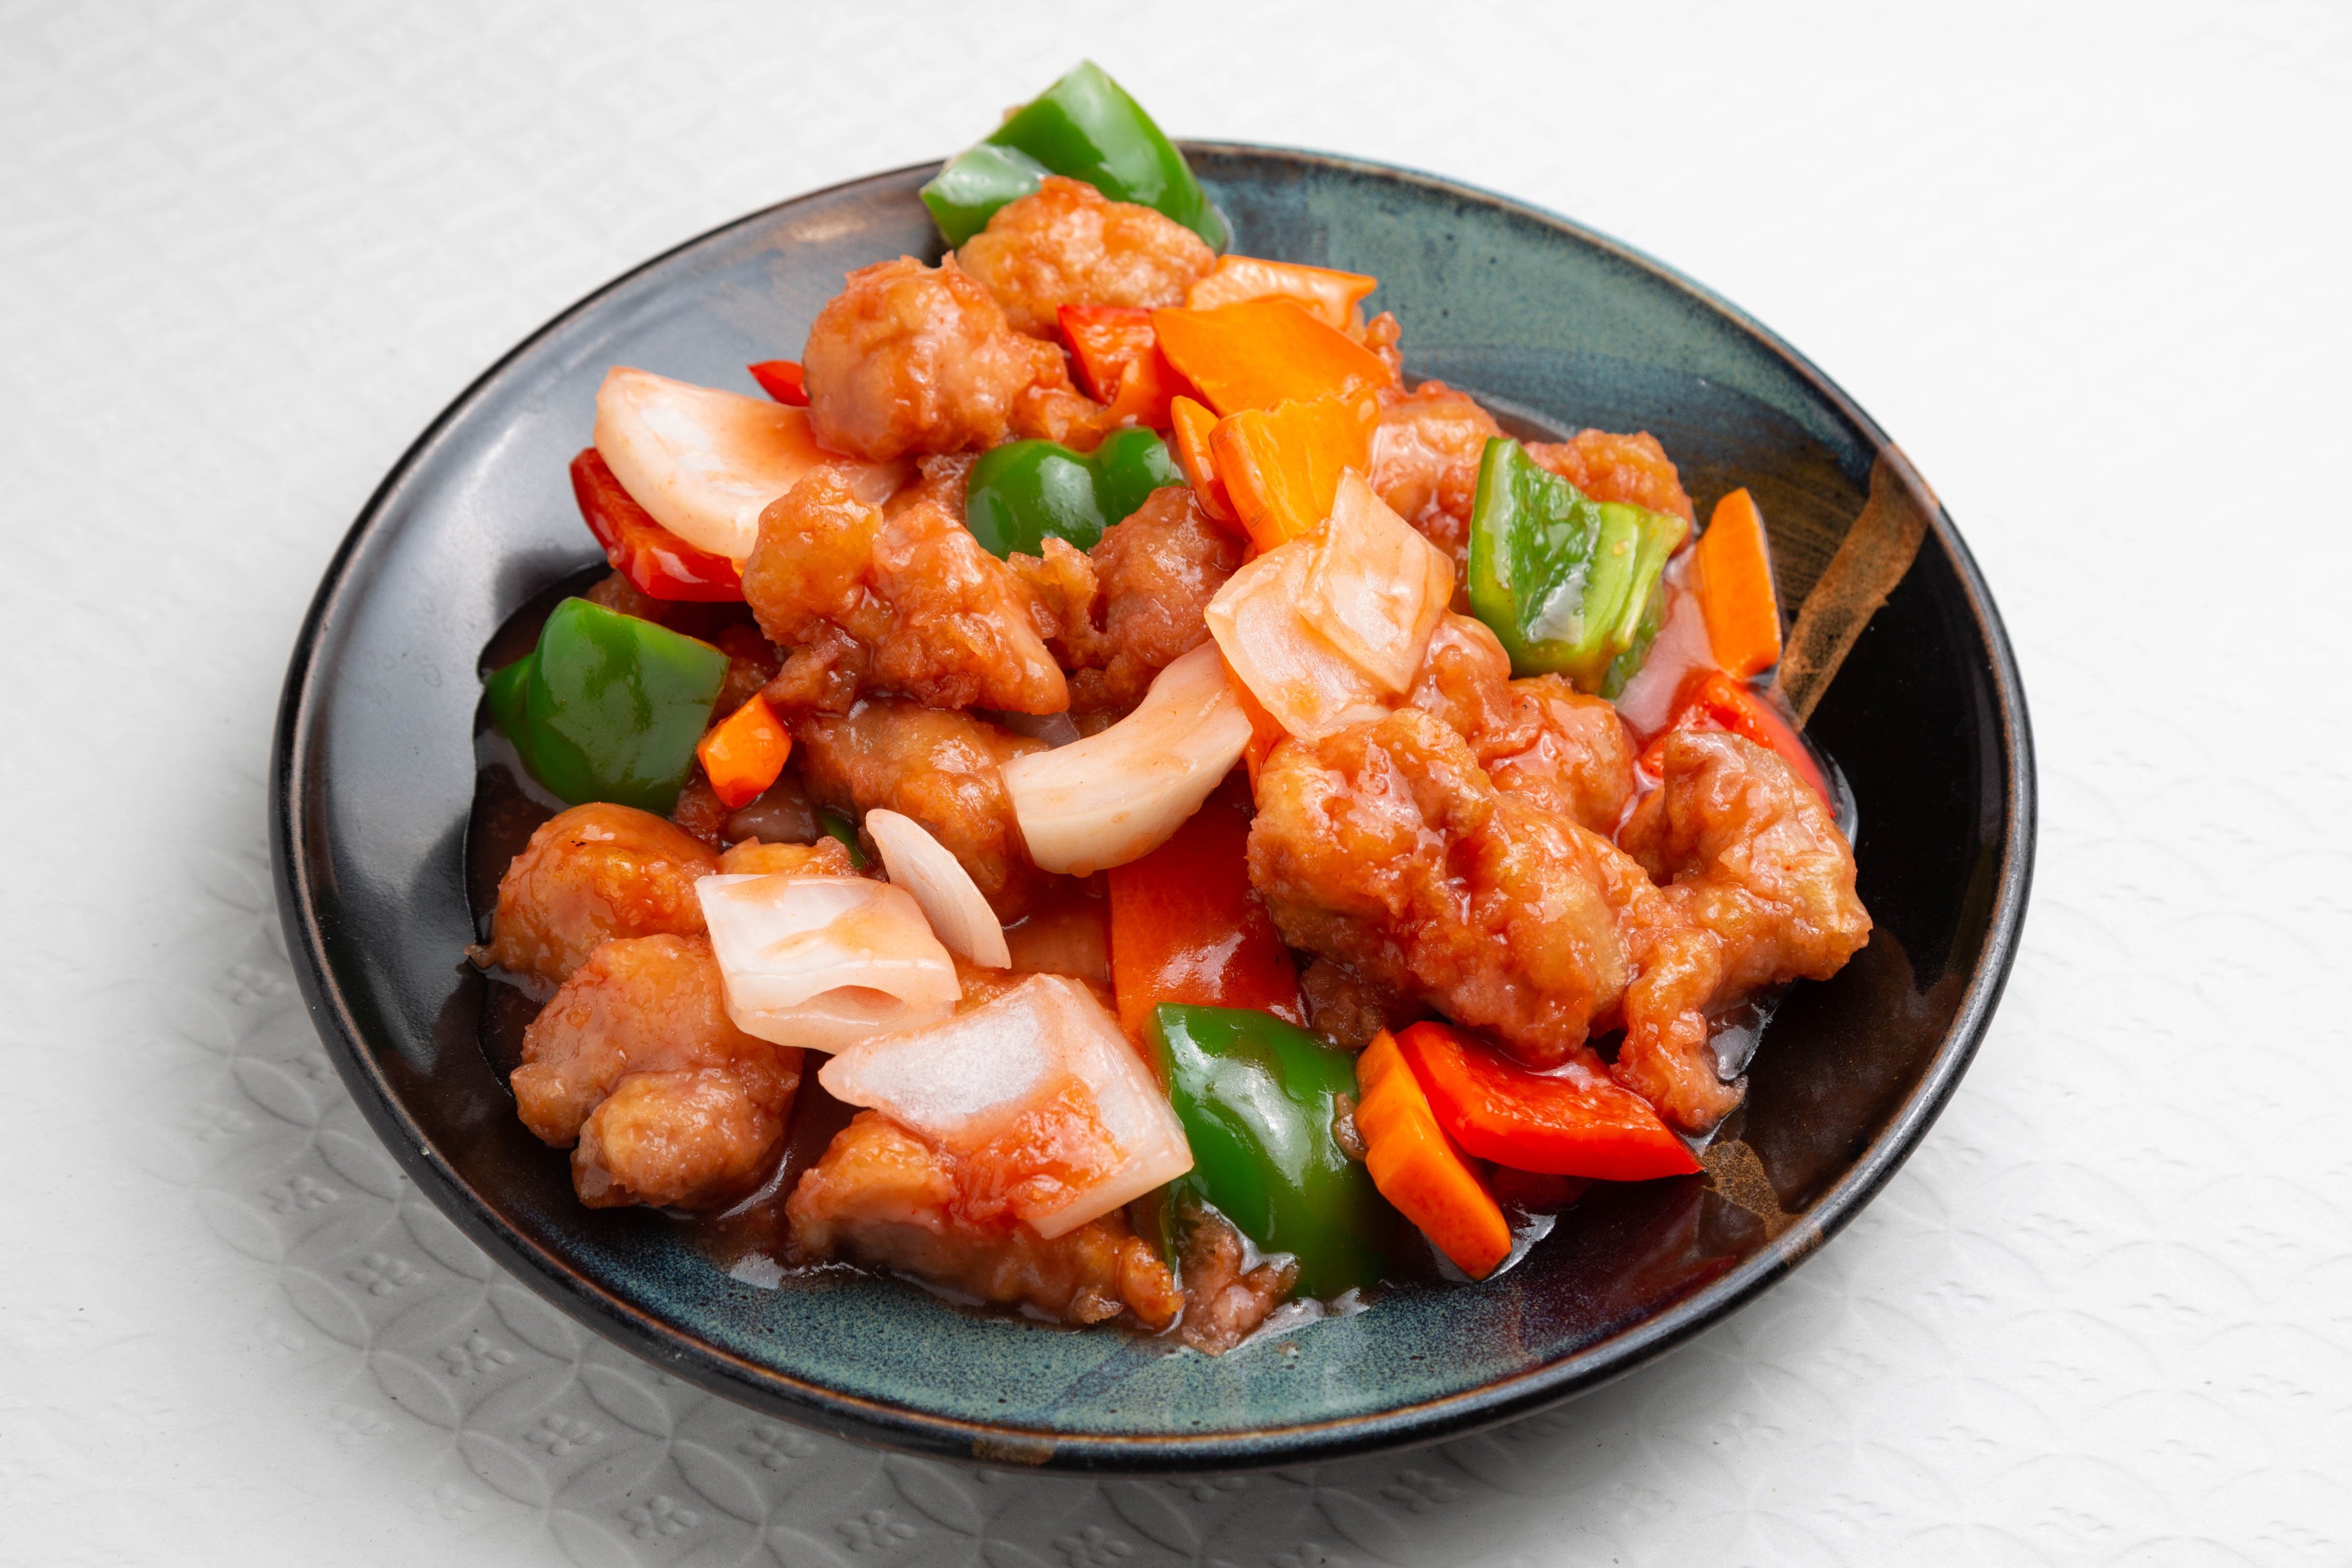 Sweet and sour pork is a Chinese food staple adored globally. Hong Kong chefs chart its evolution via Chinese takeaway restaurants in the UK, and describe the versions they serve today. Photo: Getty Images